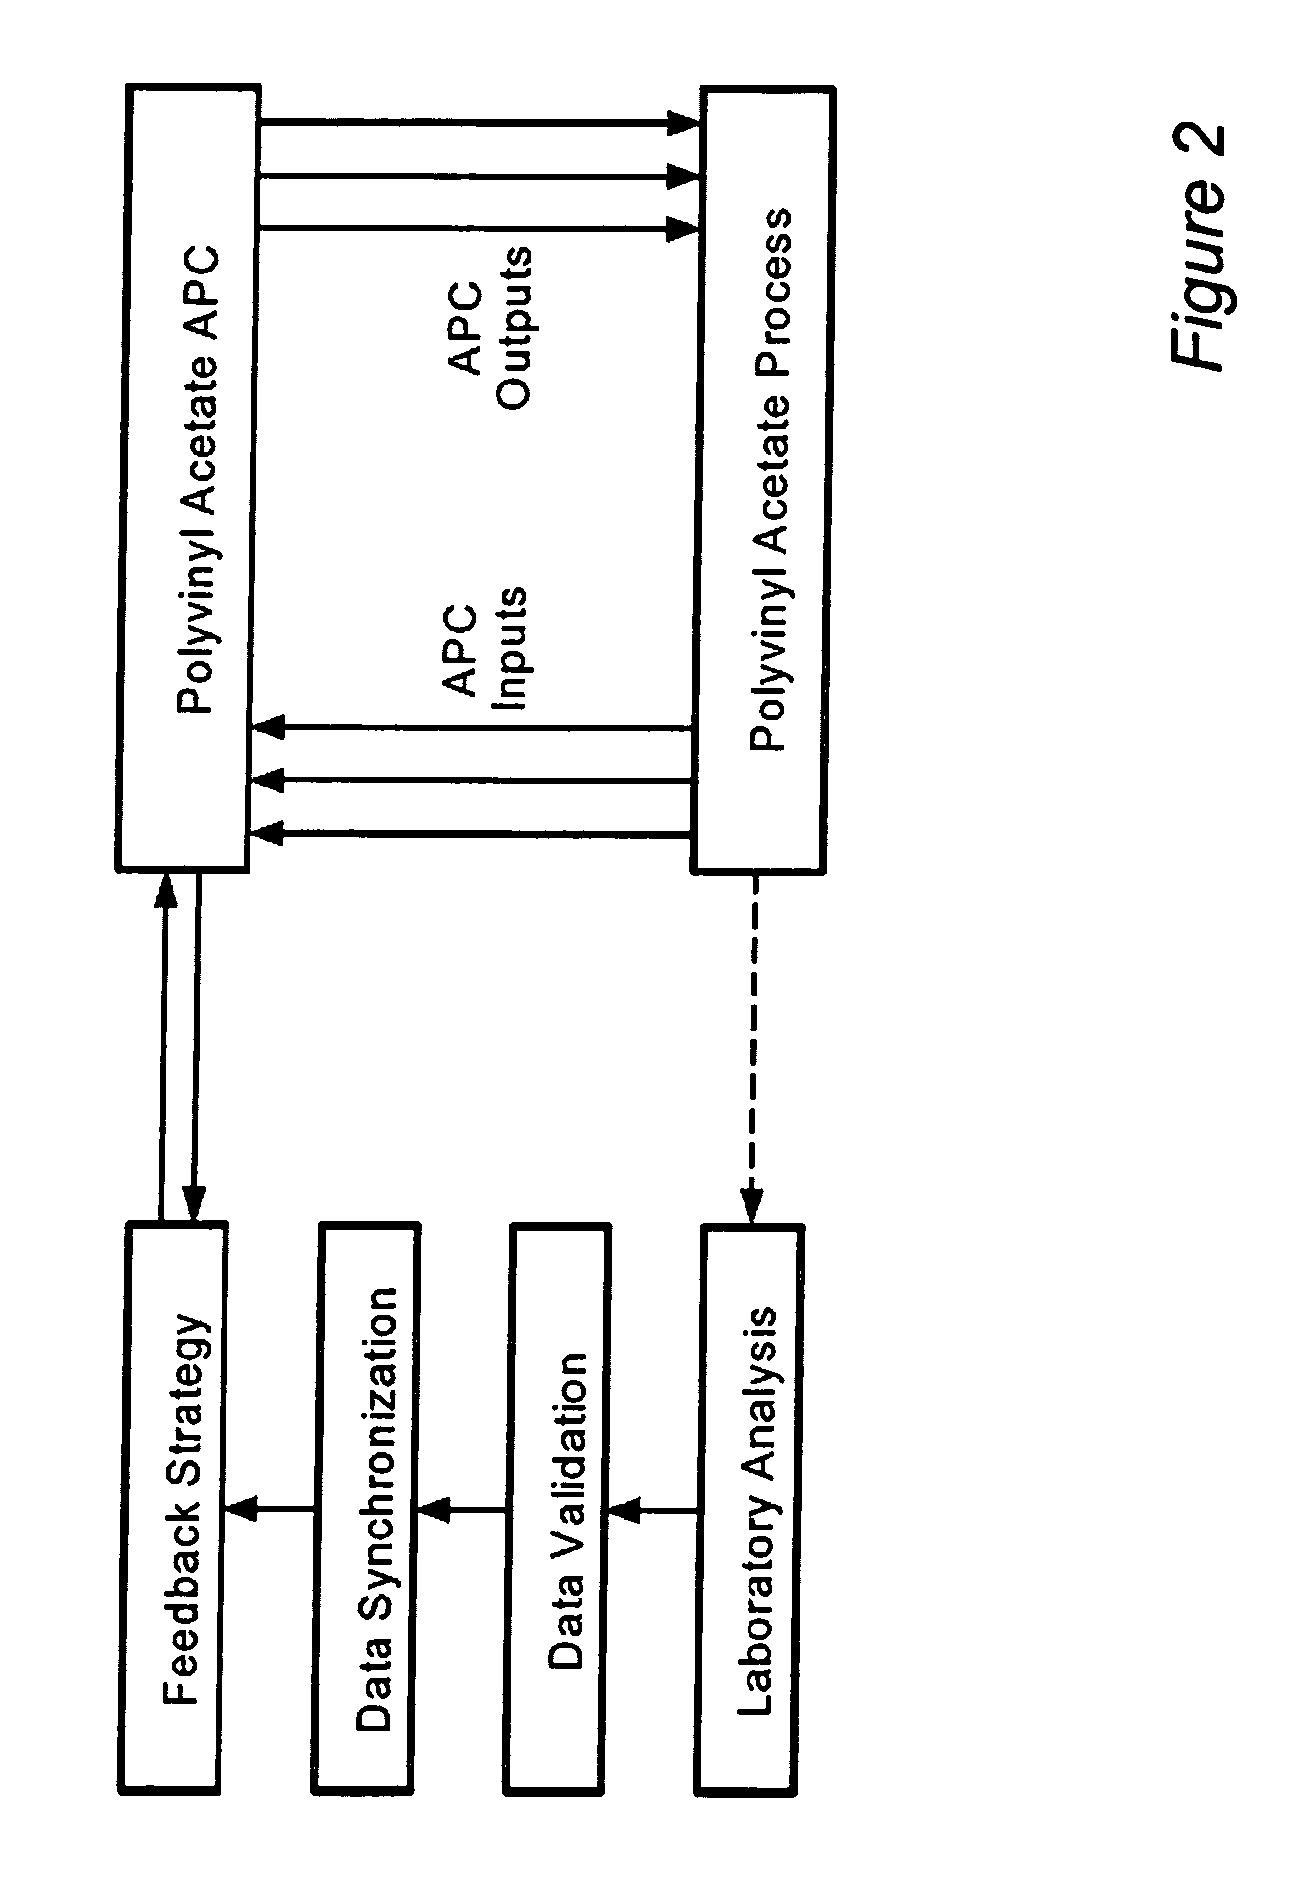 Method and apparatus for fuzzy logic control enhancing advanced process control performance